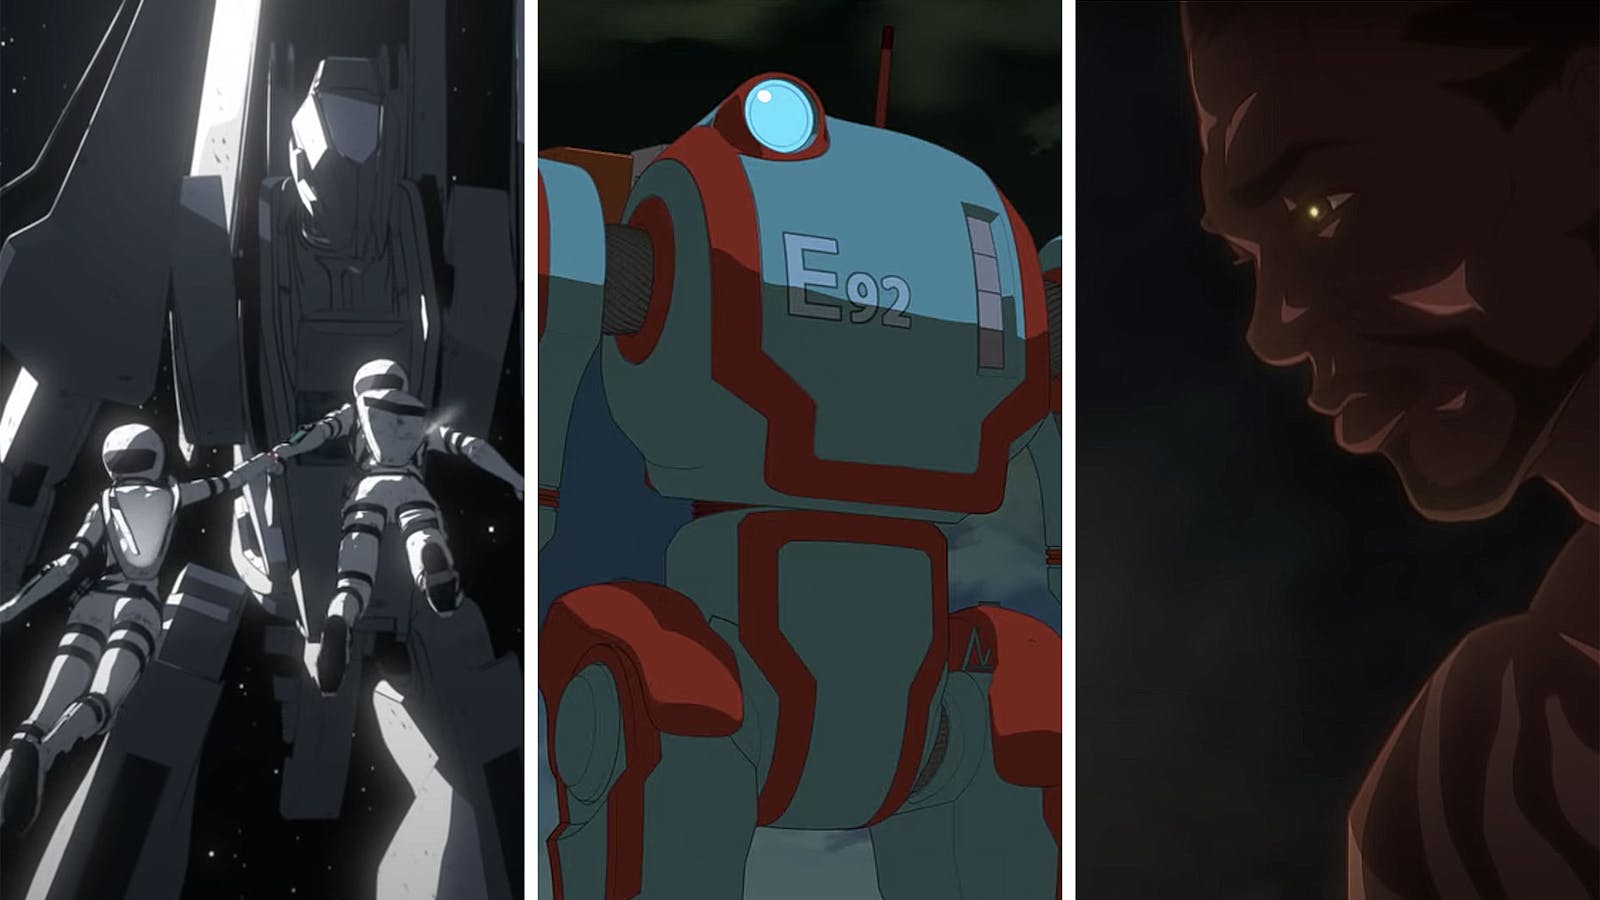 Scenes from Netflix's anime series Knights of Sidonia, Eden and Yasuke. Screengrabs via YouTube.